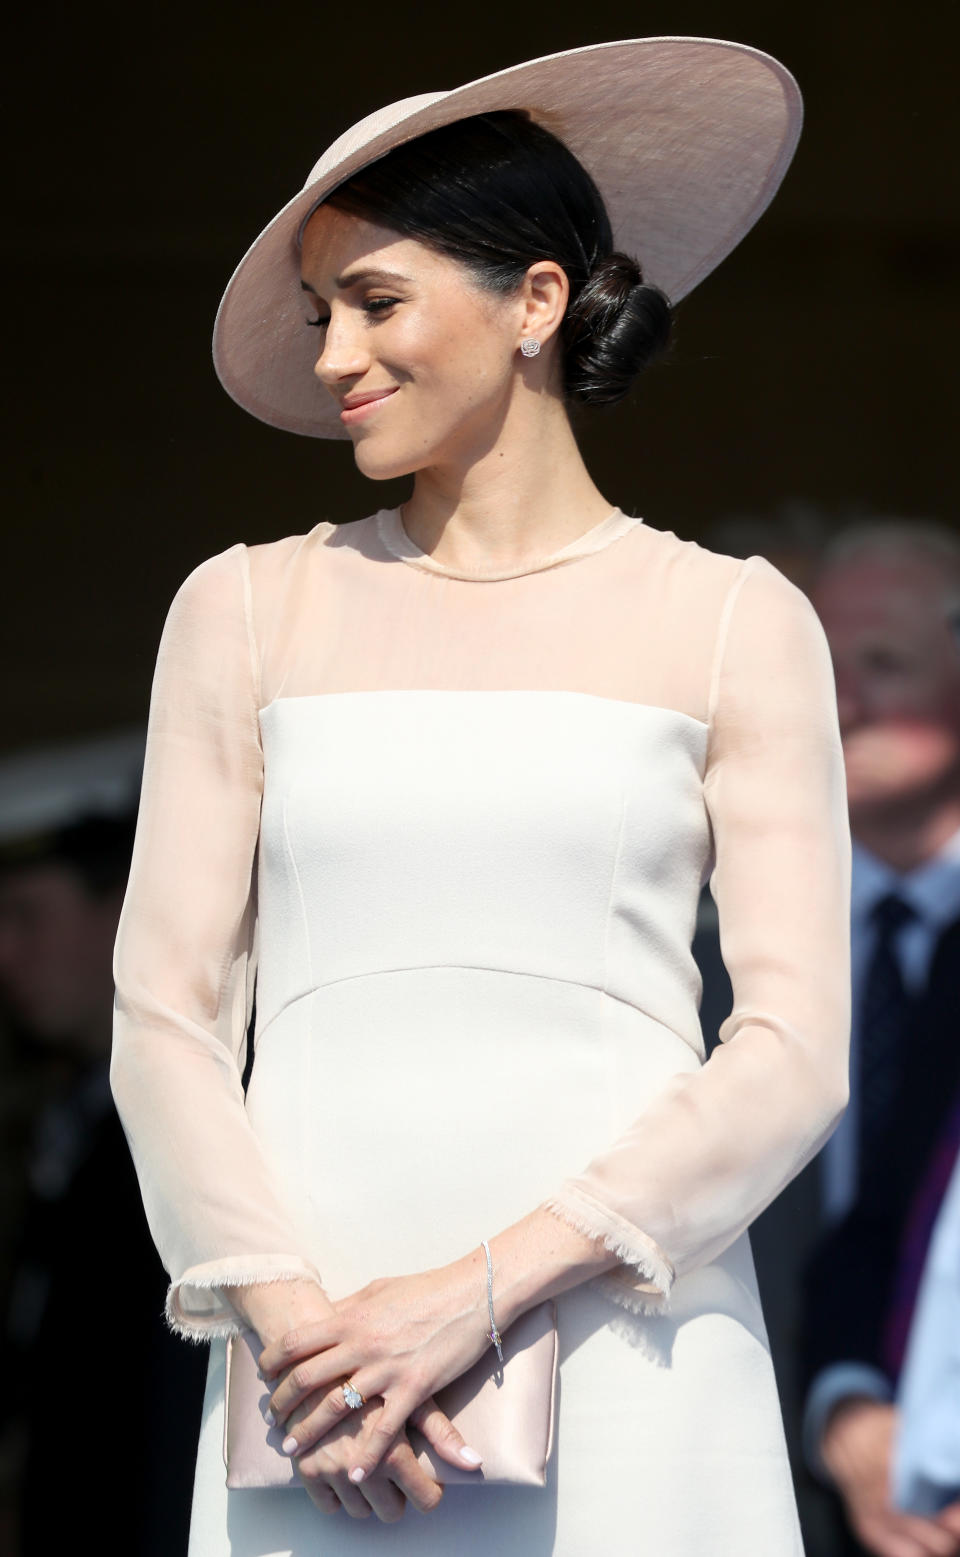 The duchess’s “training” is set to last for six months. (Photo: Getty Images)